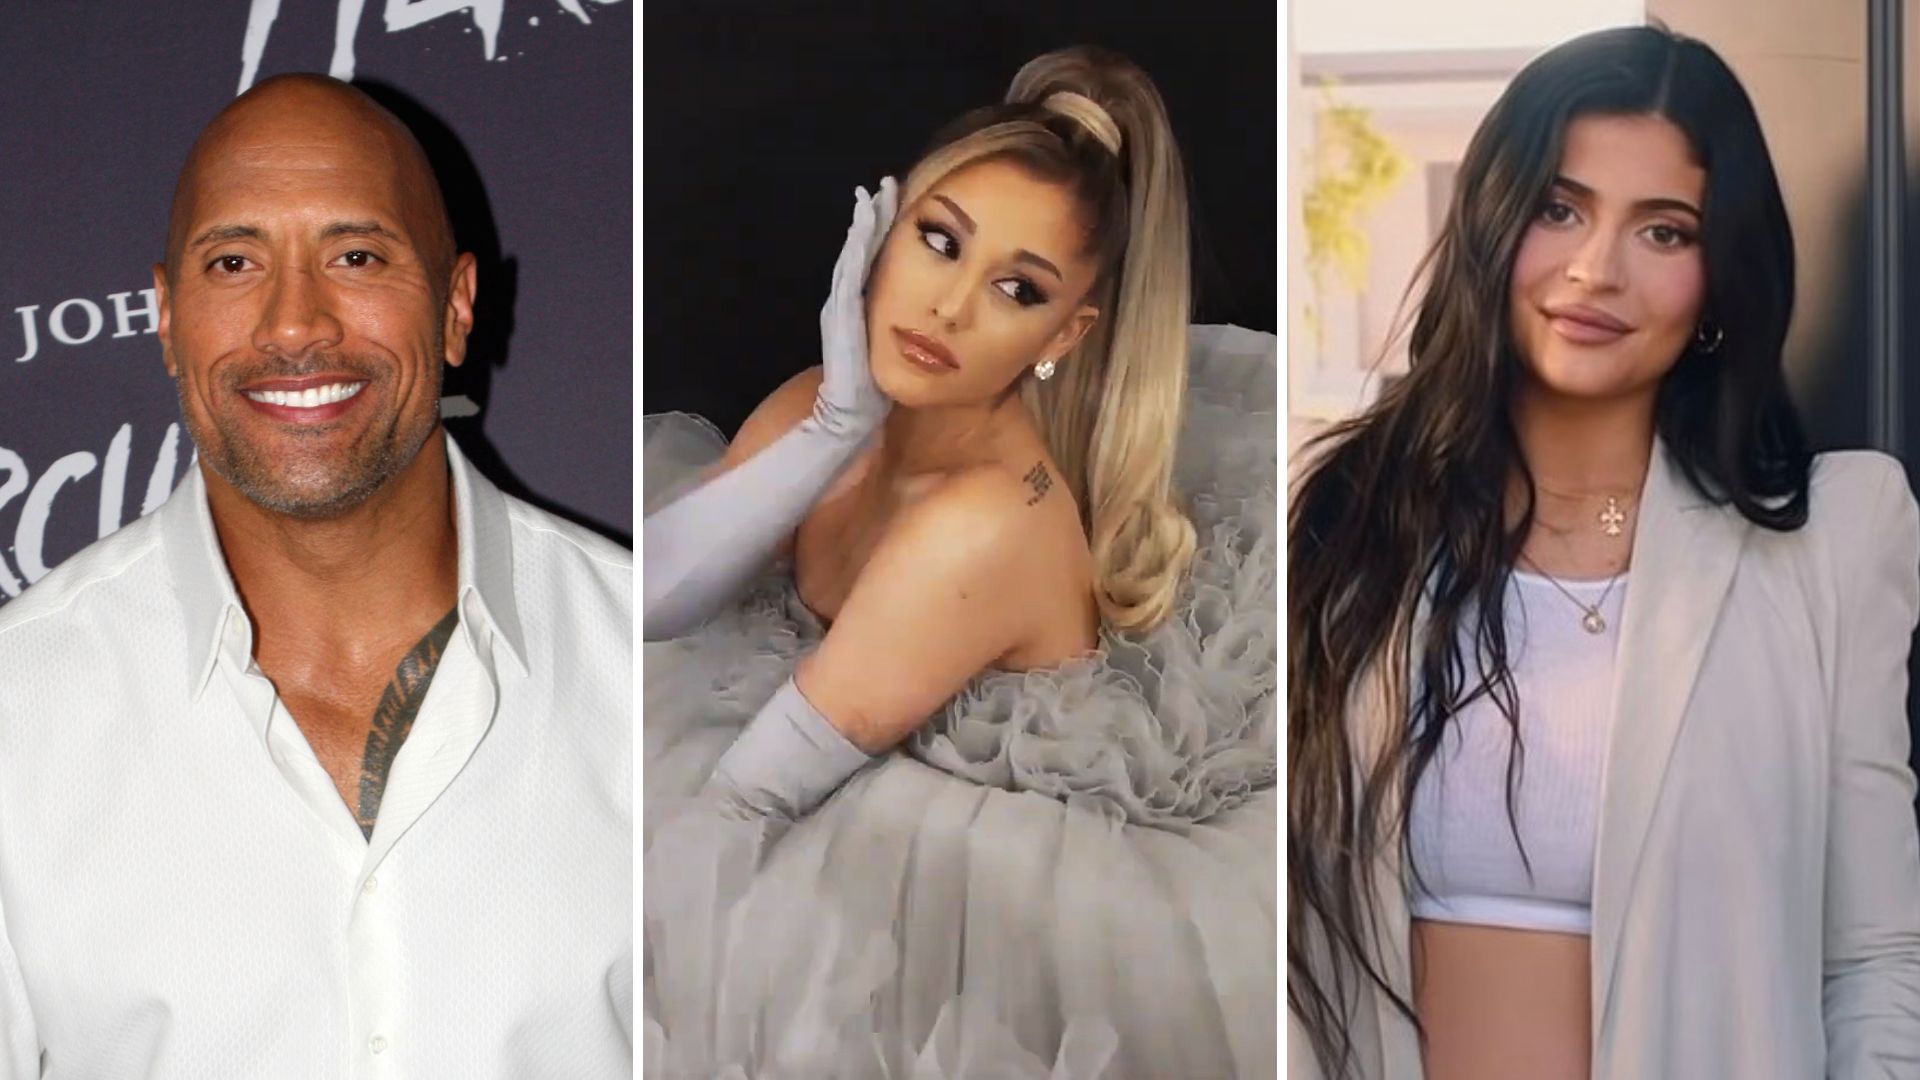 Top influencer earners Dwayne Johnson, Ariana Grande and Kylie Jenner